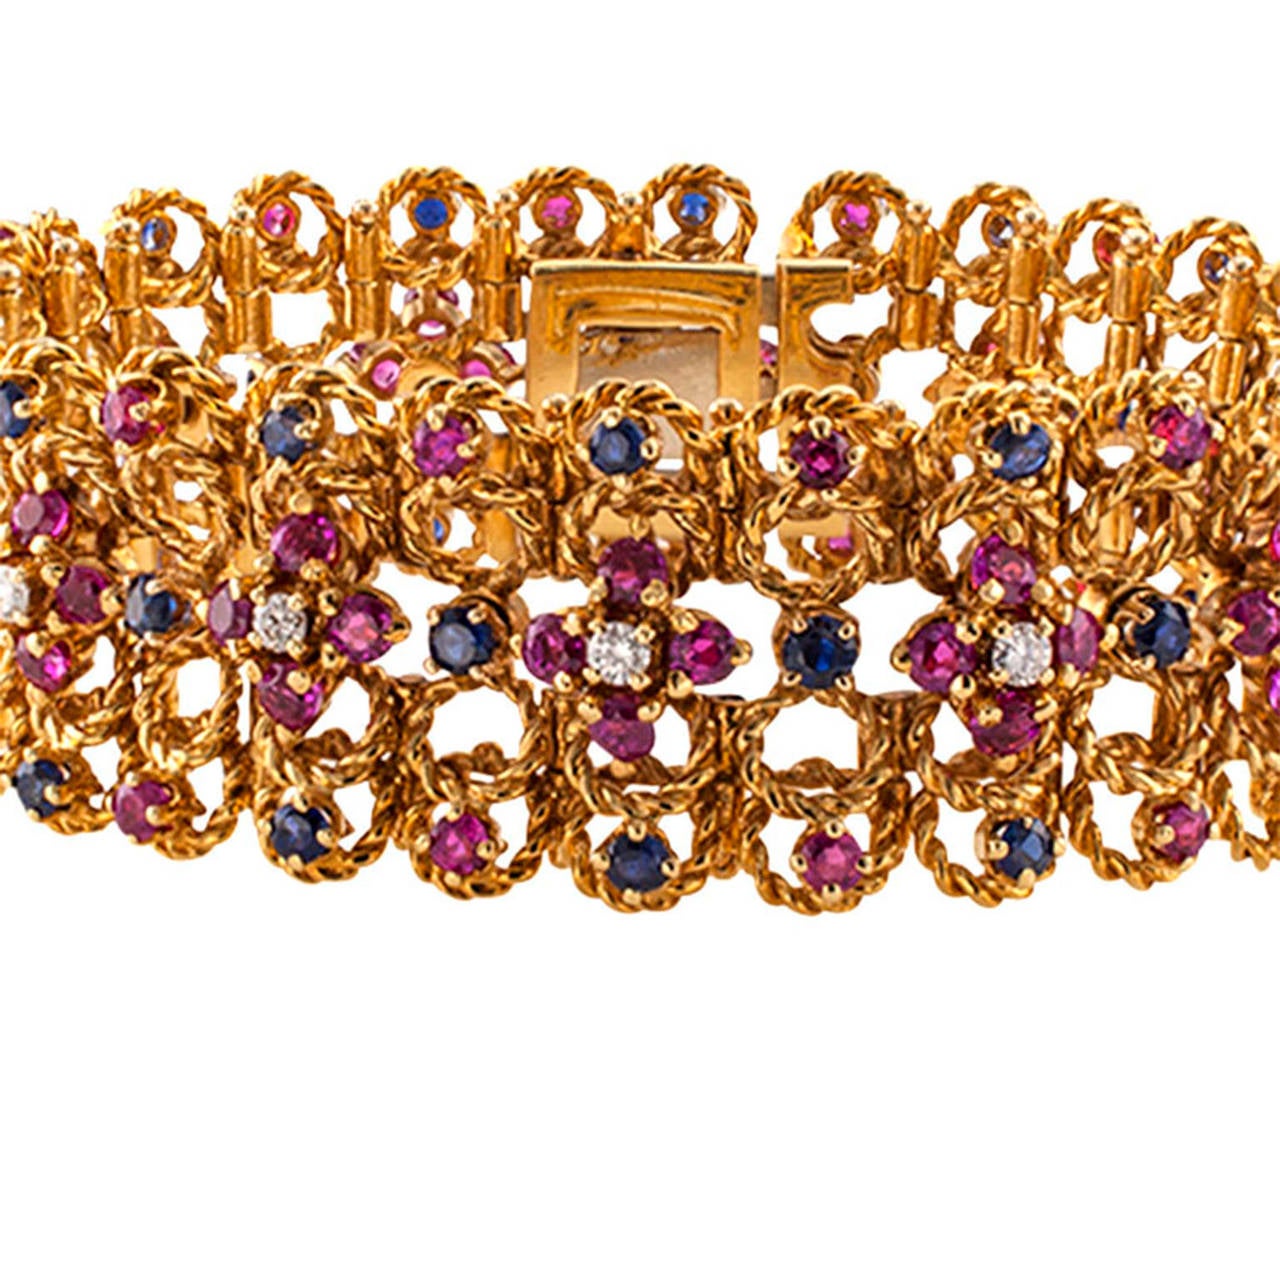 Wide Ruby Diamond and Sapphire Bracelet

This 18 karat gold bracelet,  with open work design resembles a shimmering ribbon composed by tiny rings of corded gold set throughout with diamonds weighing approximately 0.75 carat, approximately VS